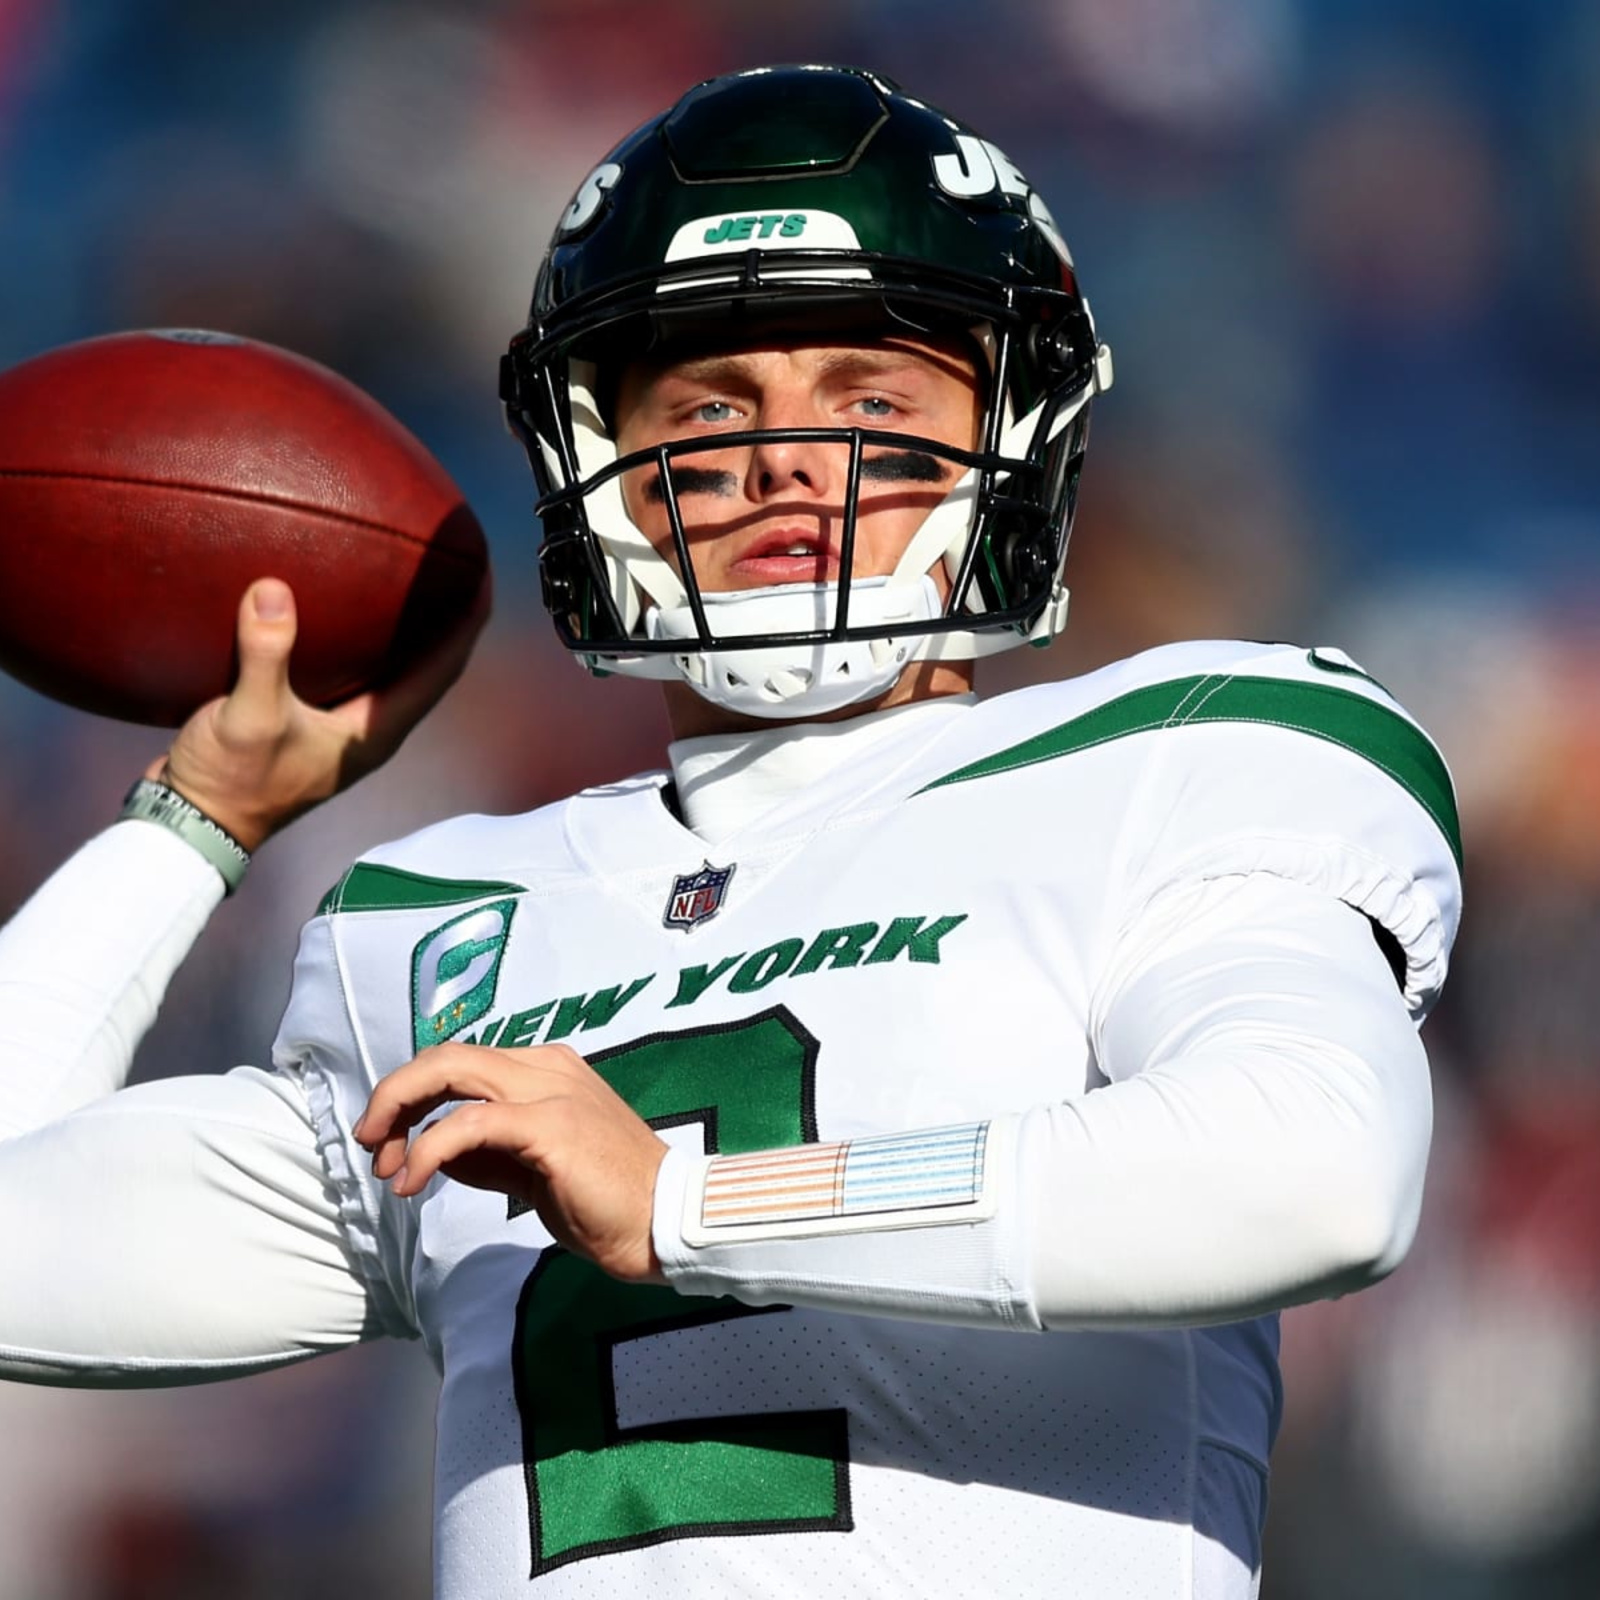 Mike White injury: Jets quarterback taken to hospital after loss to Bills